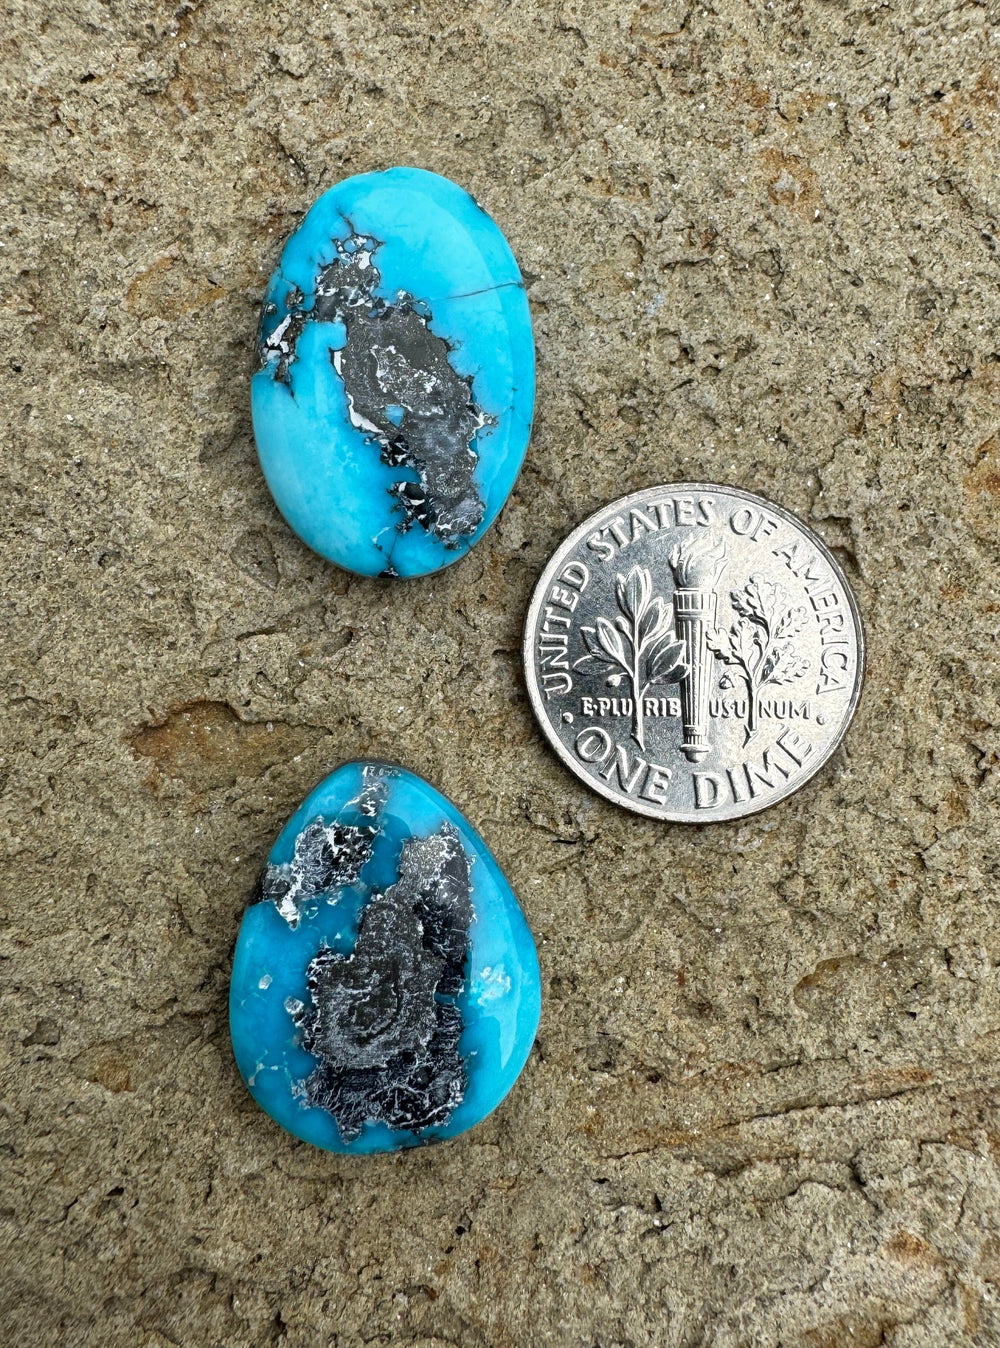 White Water Turquoise (Mexico) Cabochons Choose One Stone